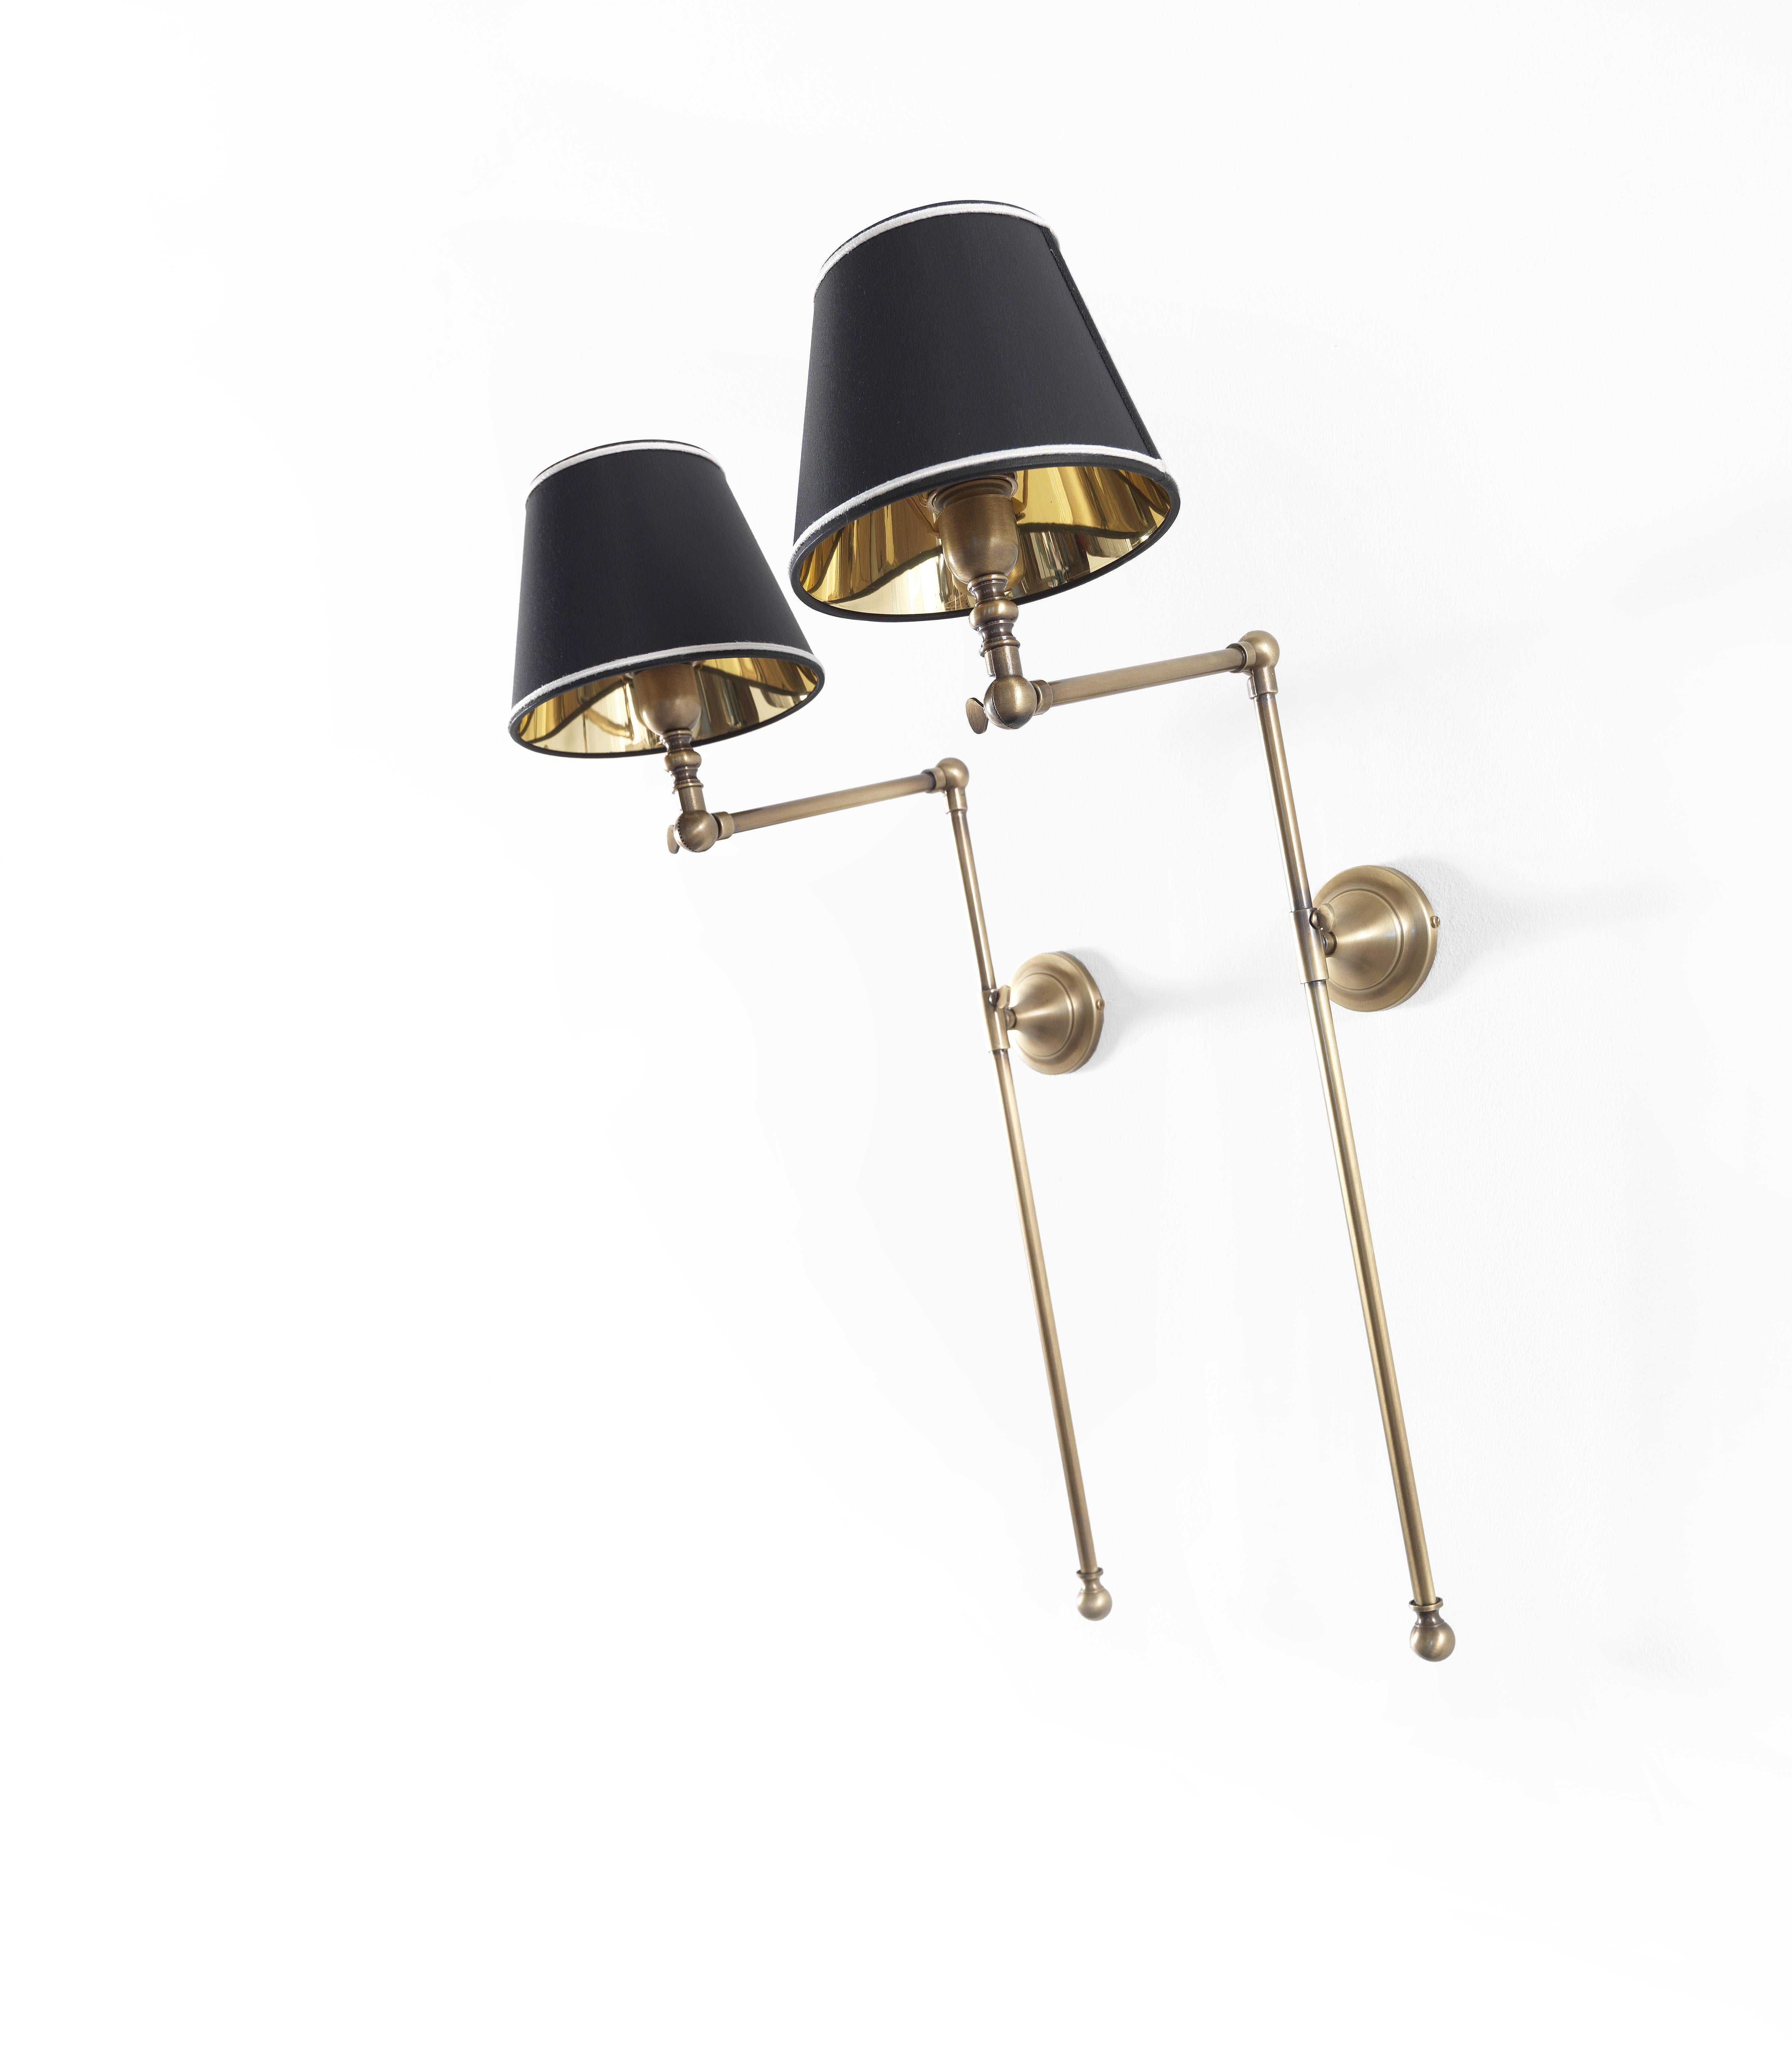 The Amy wall lamp is pictured with structure in brass and iron. gold finishing. Shades with black chinette fabric with white details.   
   